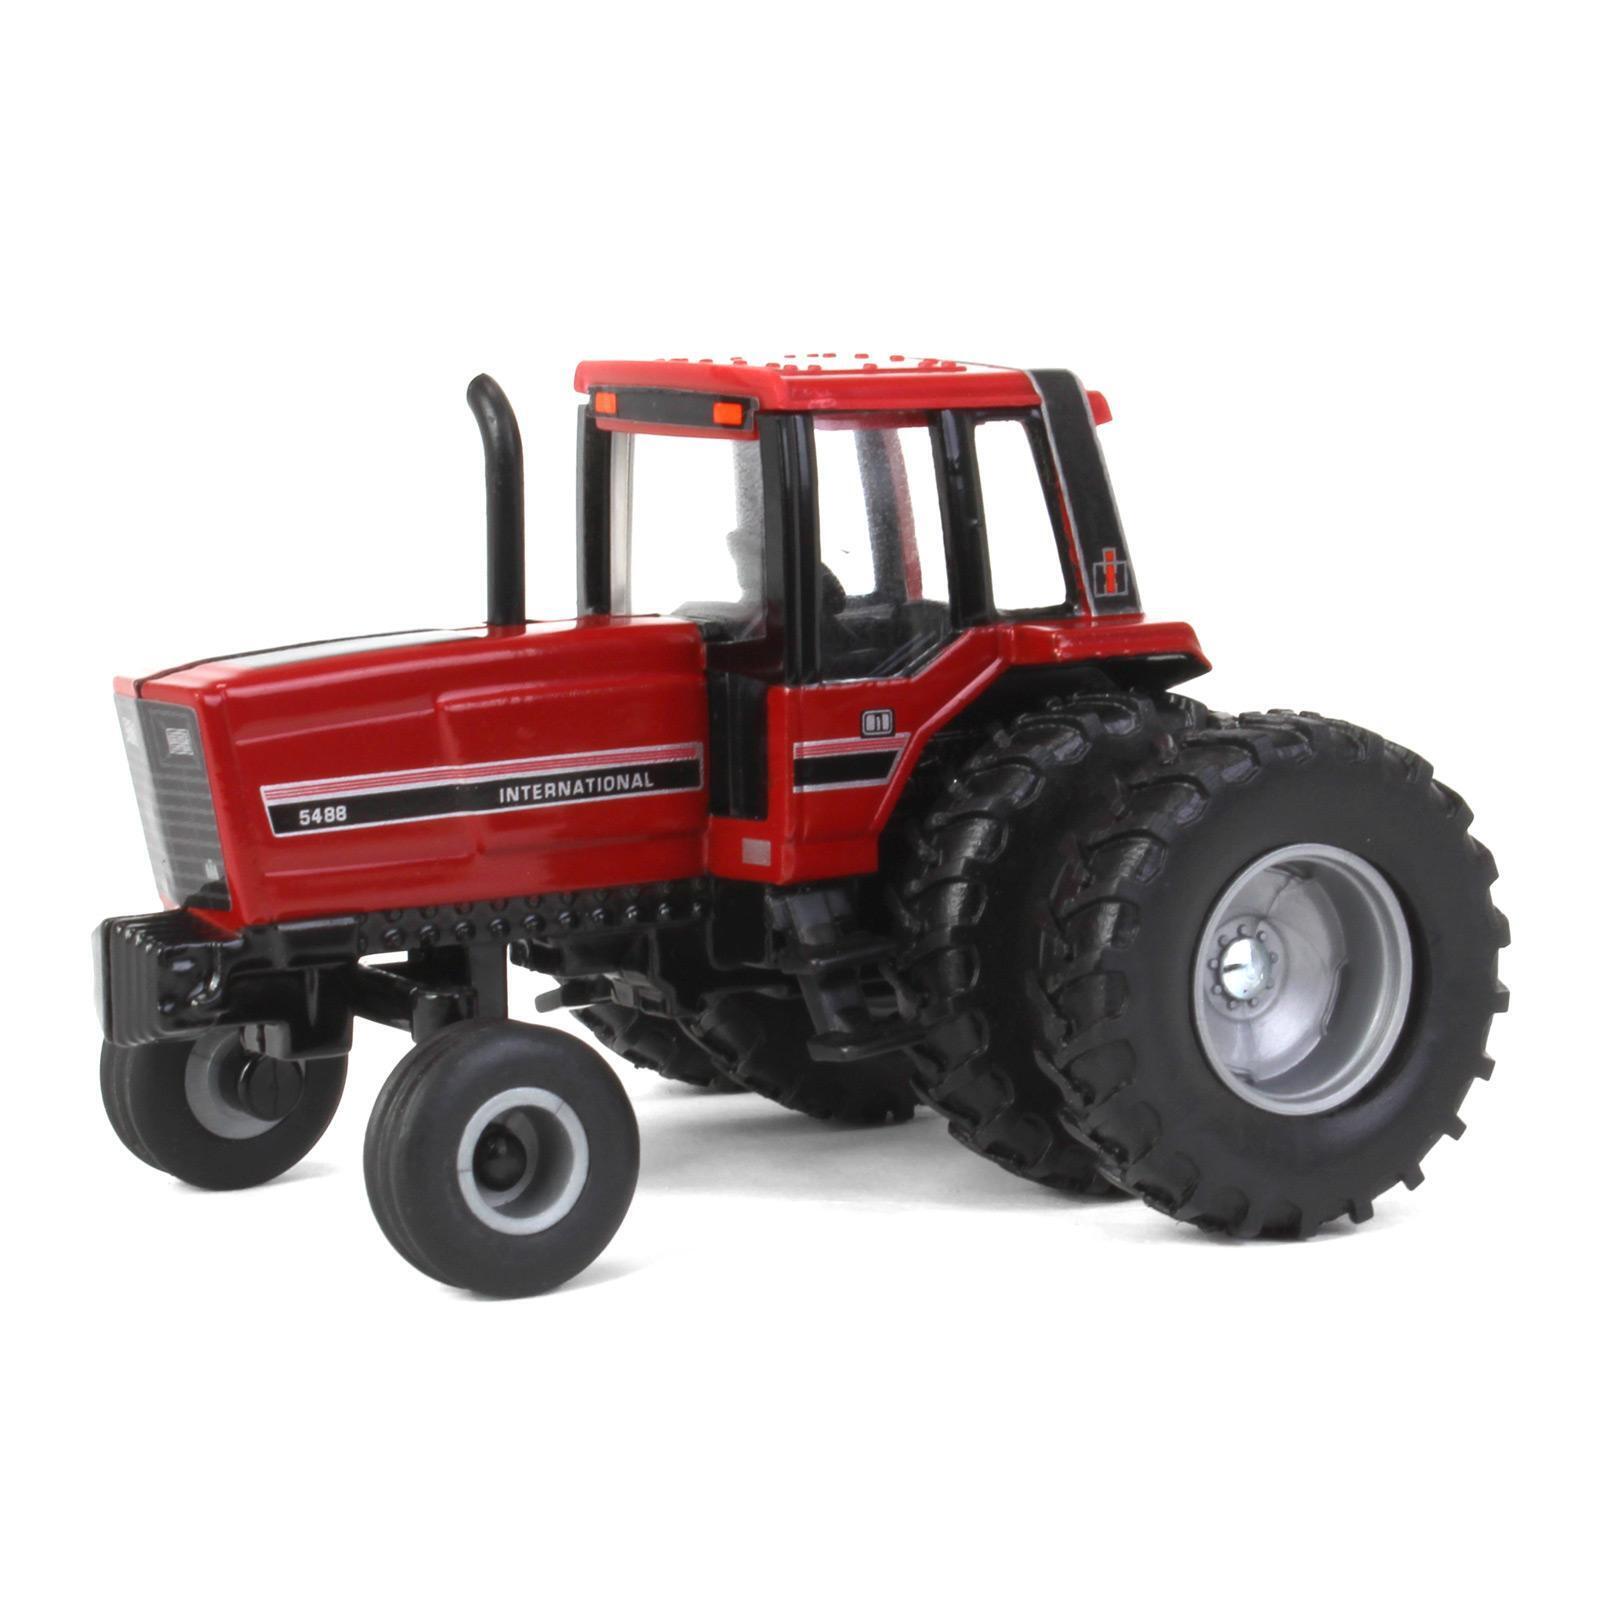 ERTL 1/64 International Harvester 5488 Wide Front with Rear Duals, 44375